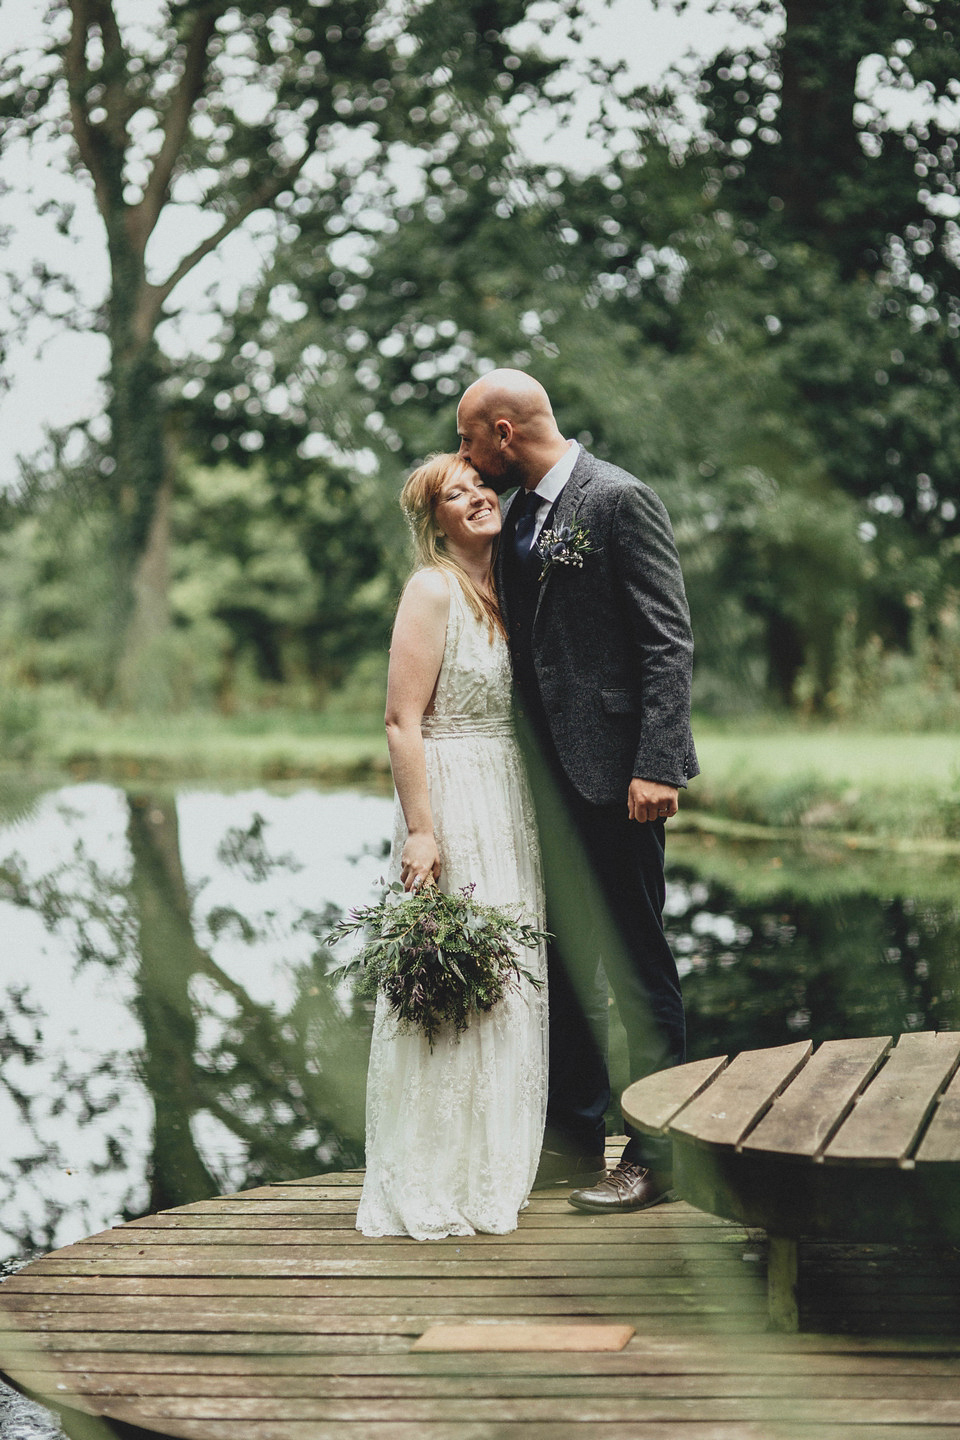 Bride Jess made her wedding dress herself. She tied the knot with Jordan in a woodland inspired wedding. Photography by Ali Paul.